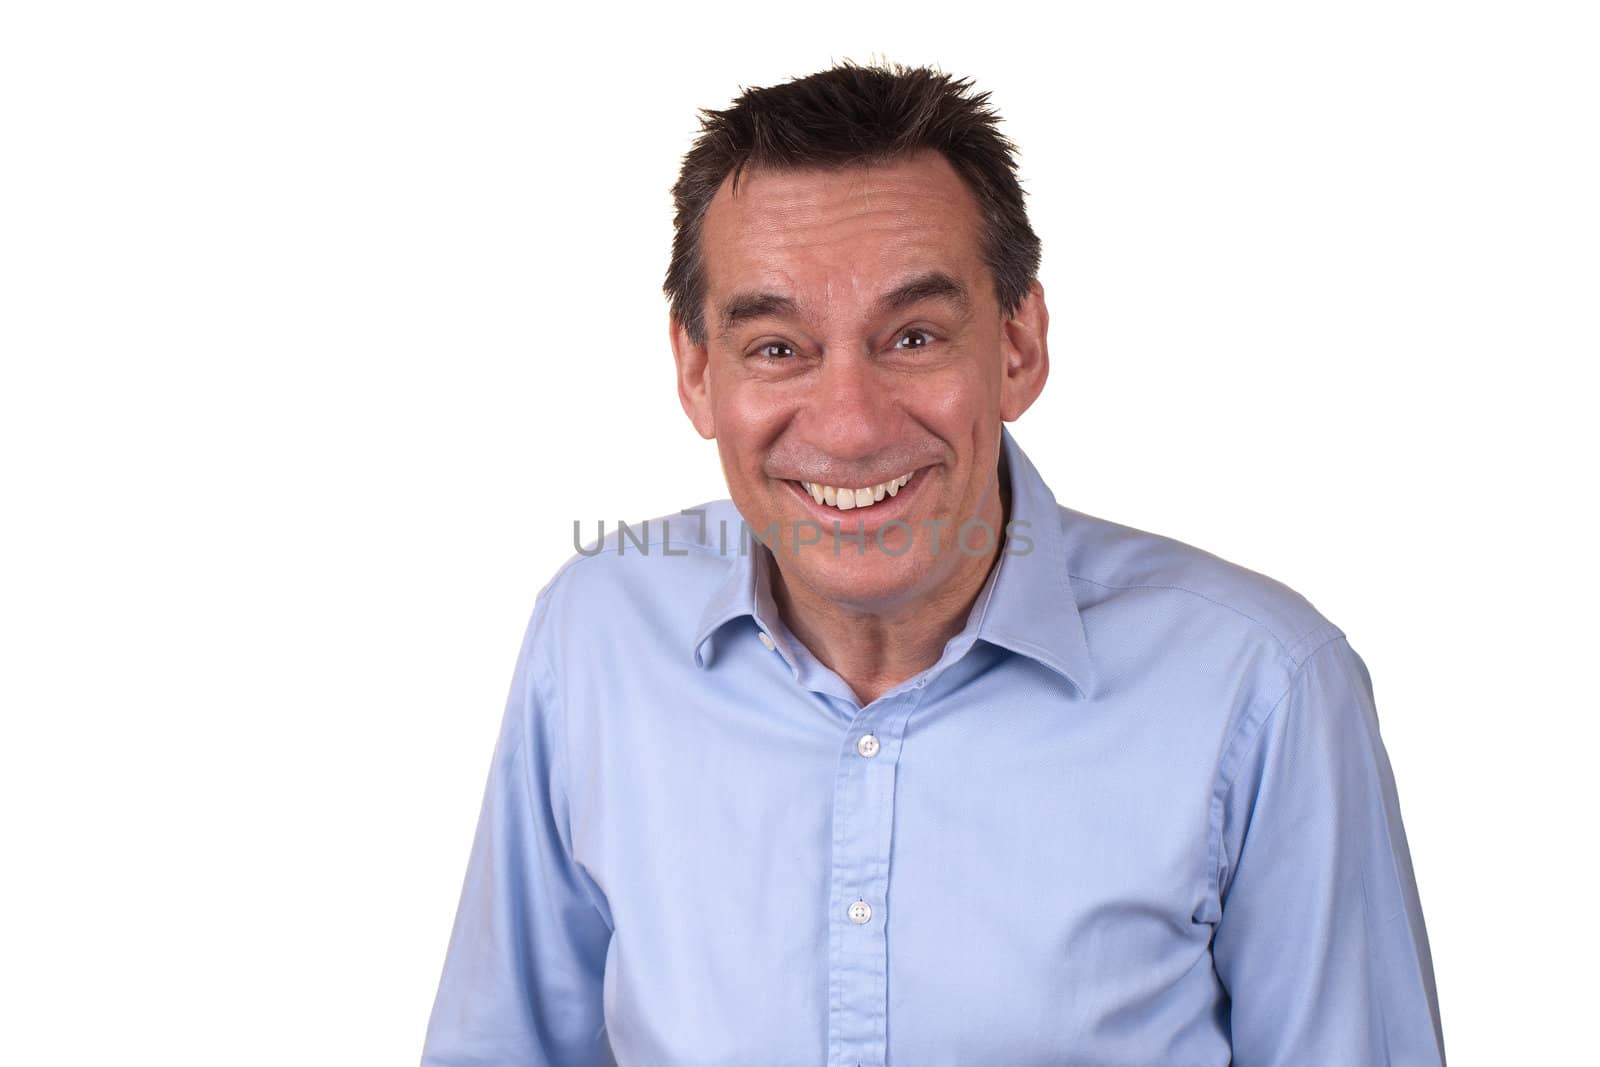 Attractive Middle Age Man in Blue Shirt Laughing with Silly Smile Isolated